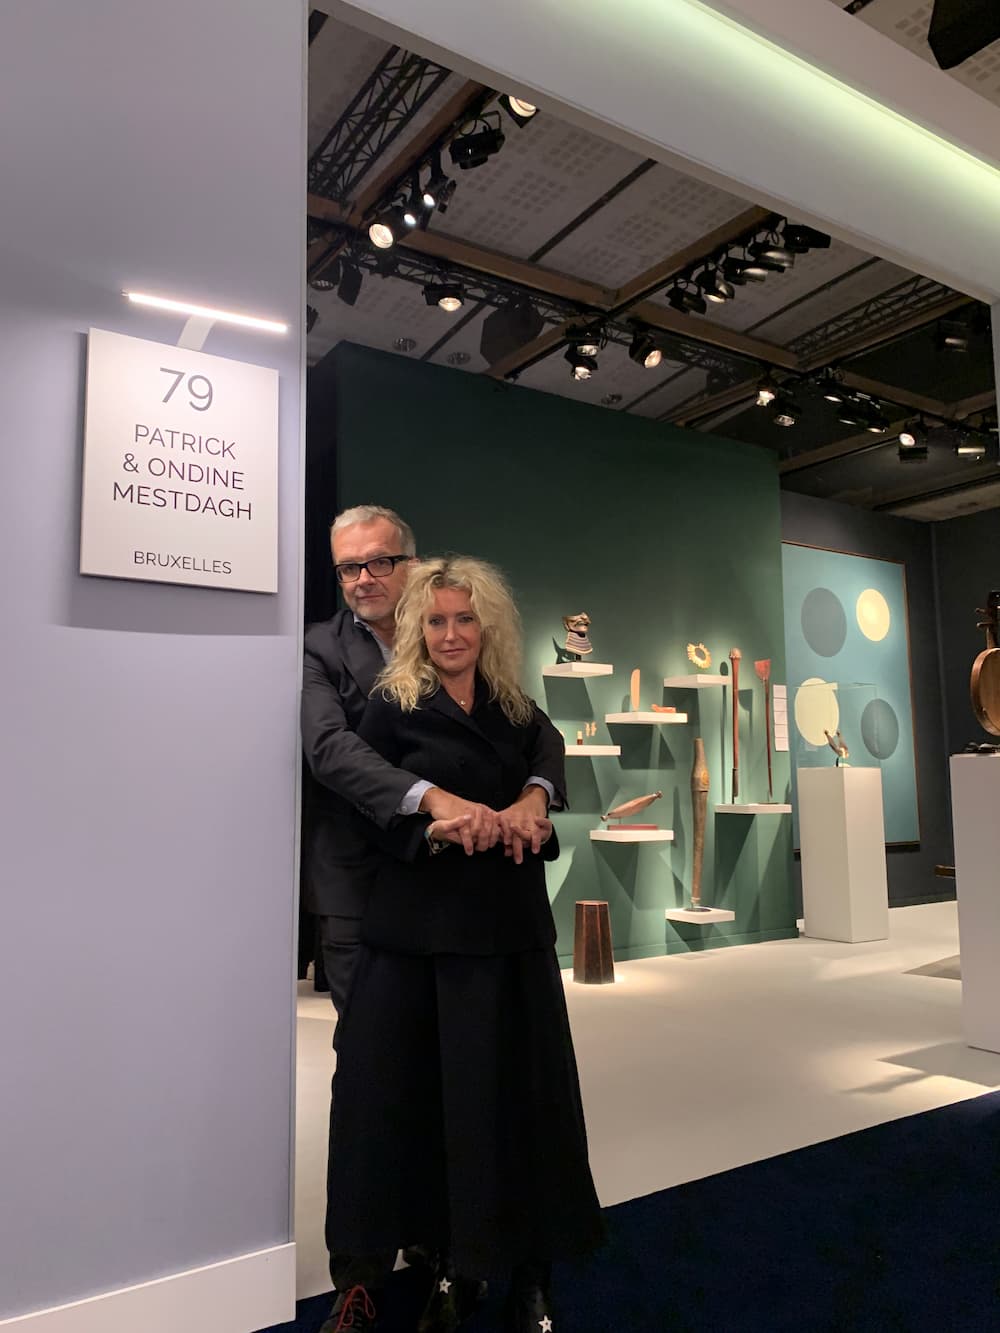 Patrick and Ondine Mestdagh in front of their stand in 2022